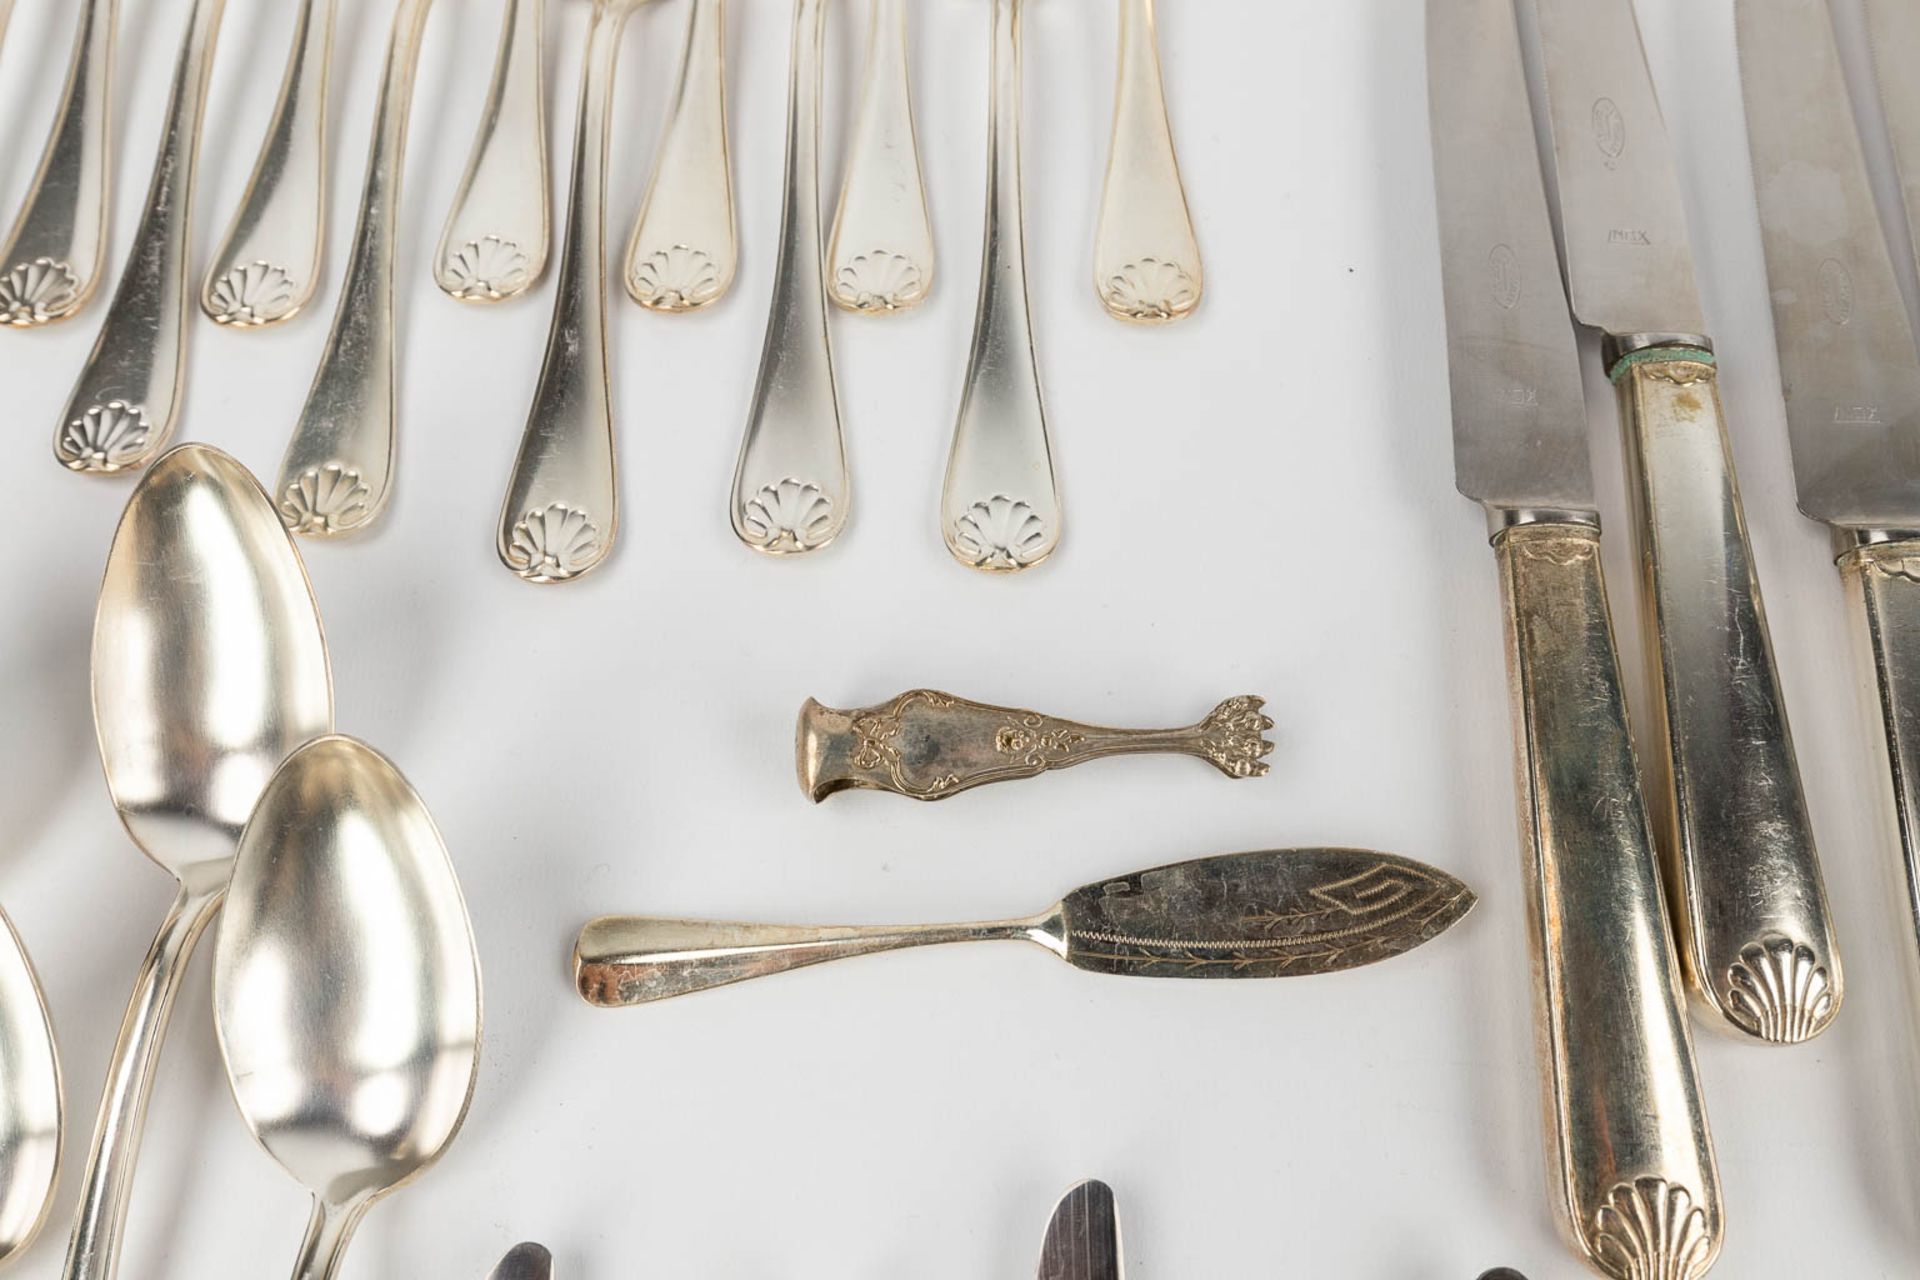 A large collection of cutlery and table accessories made of silver-plated metal. - Image 2 of 12